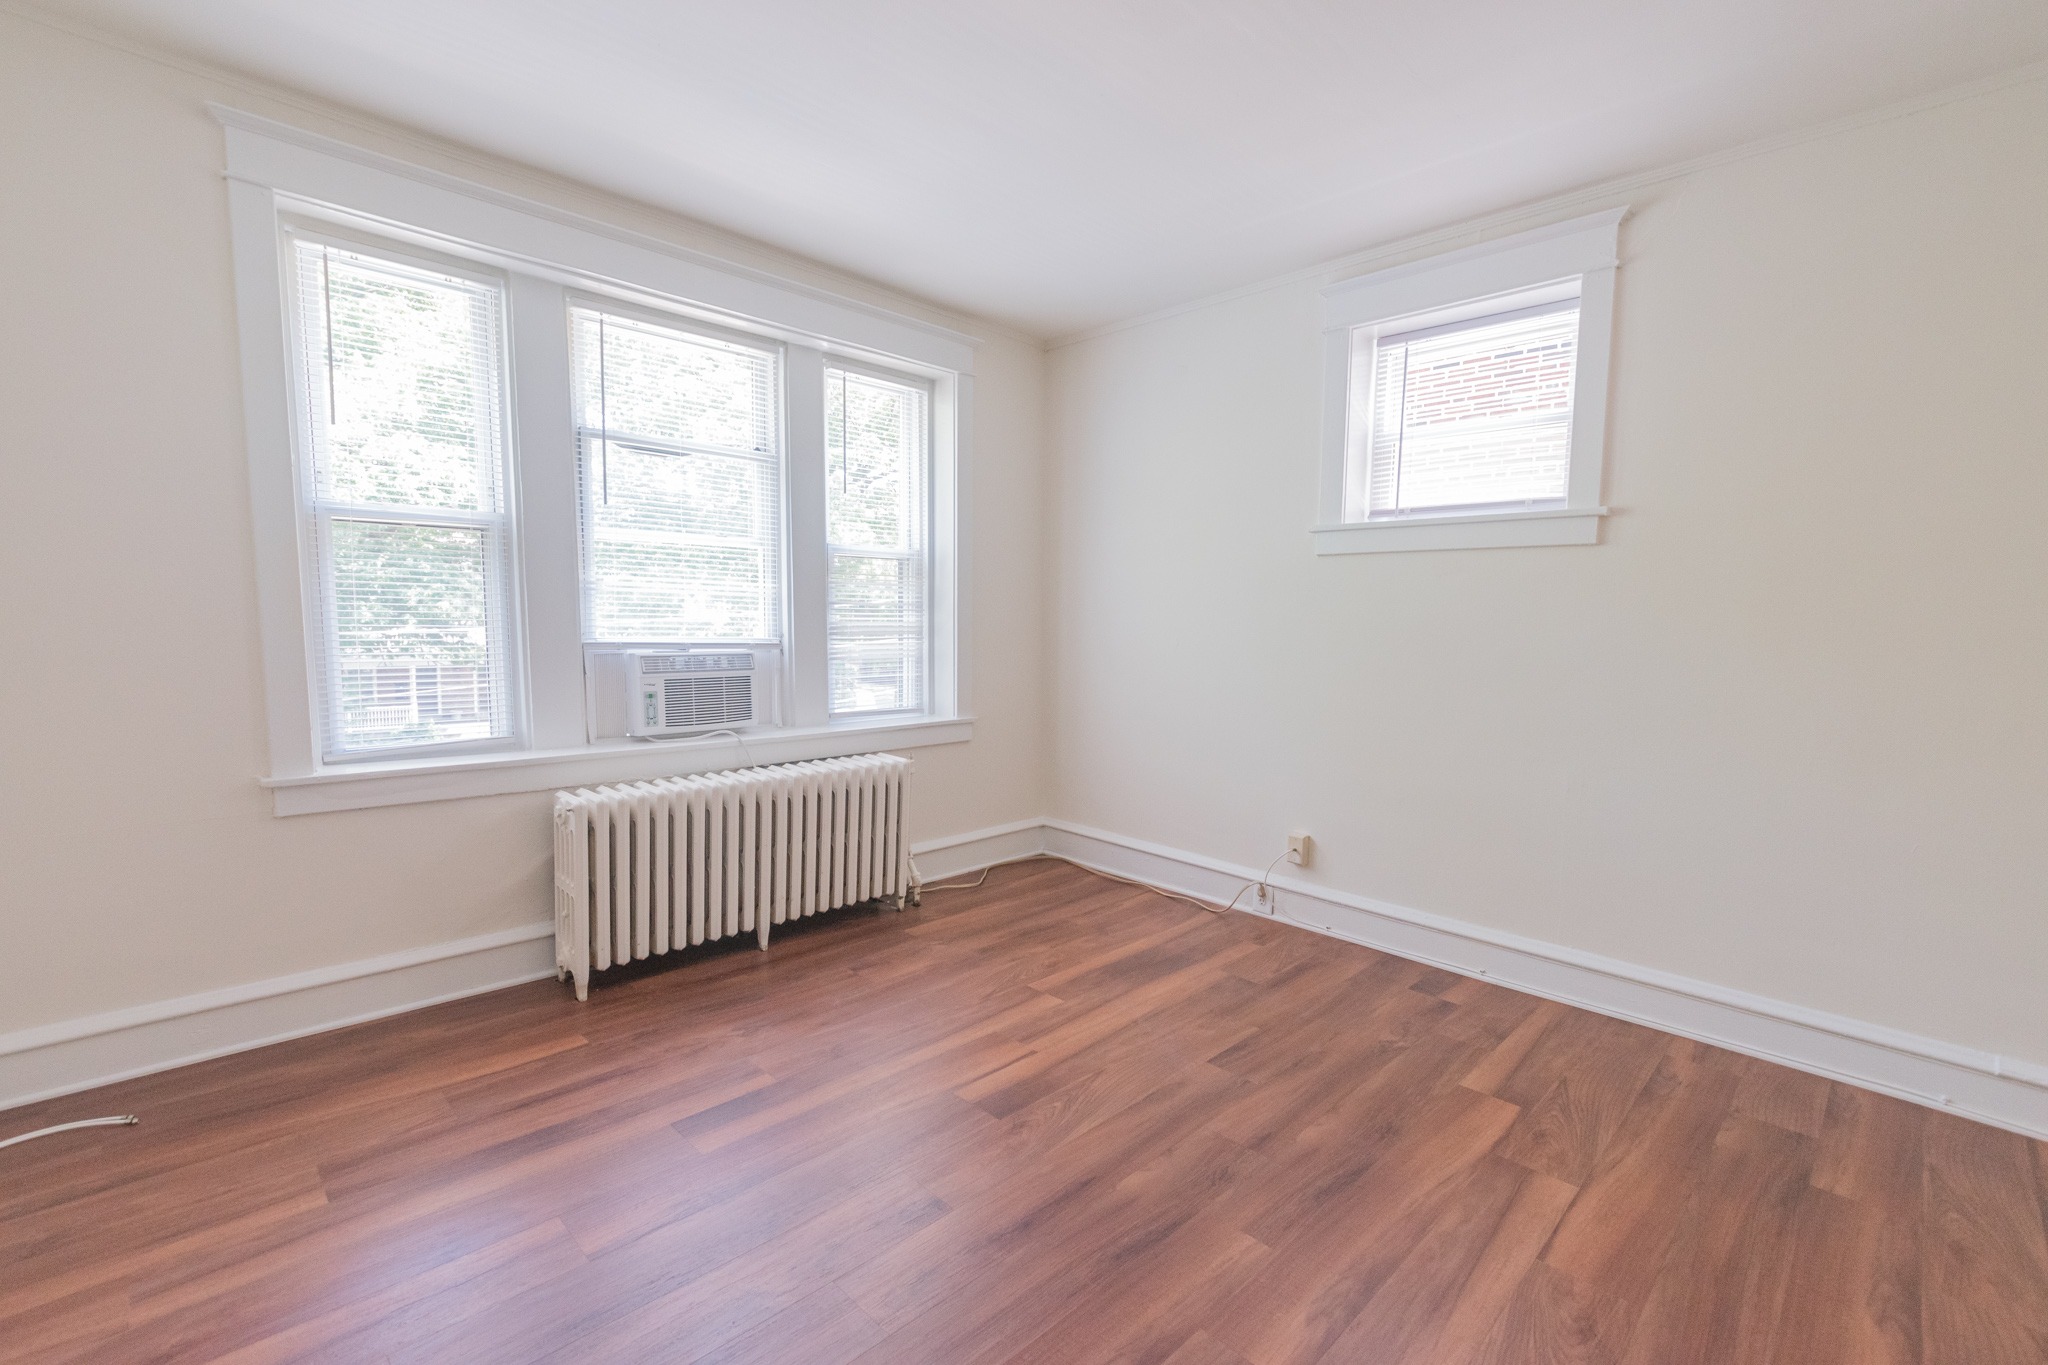 Living room area of an apartment unfurnished, fitted with vinyl flooring, a radiator, and a huge window